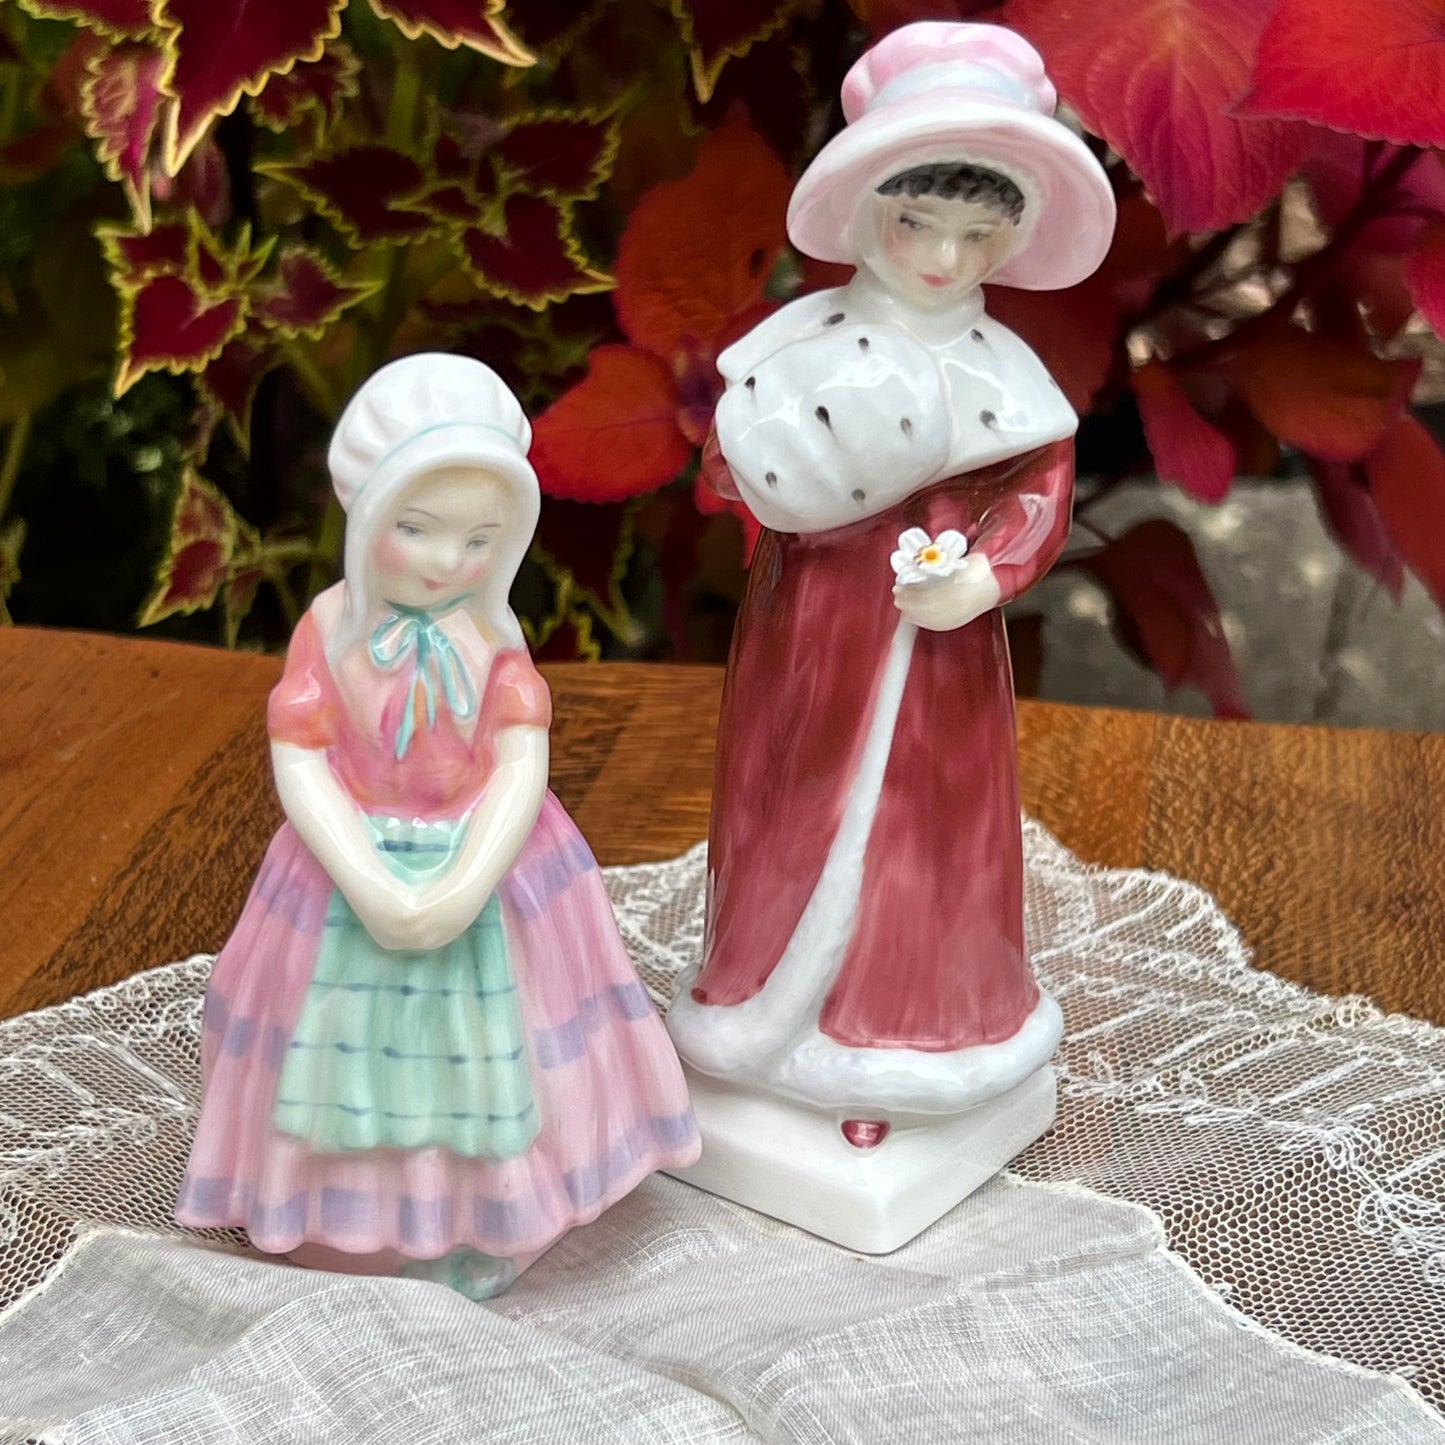 Two Vintage Royal Doulton Figurines "Tootles" HN1880 and "Sophie" HN2883